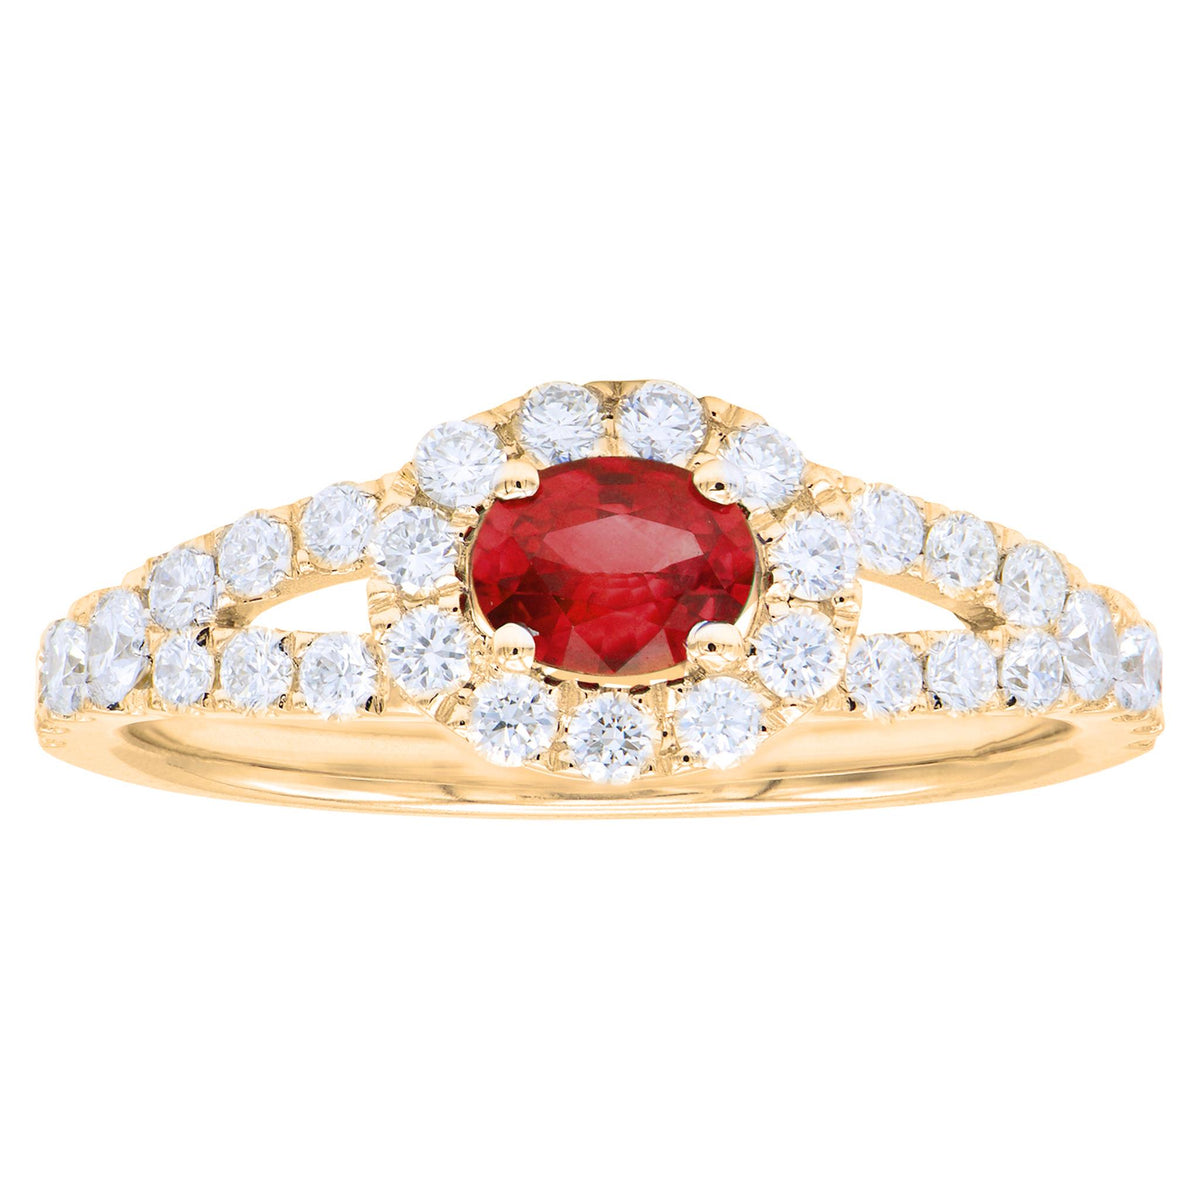 14Kt Yellow Gold Halo Gemstone Ring With 0.46ct Ruby